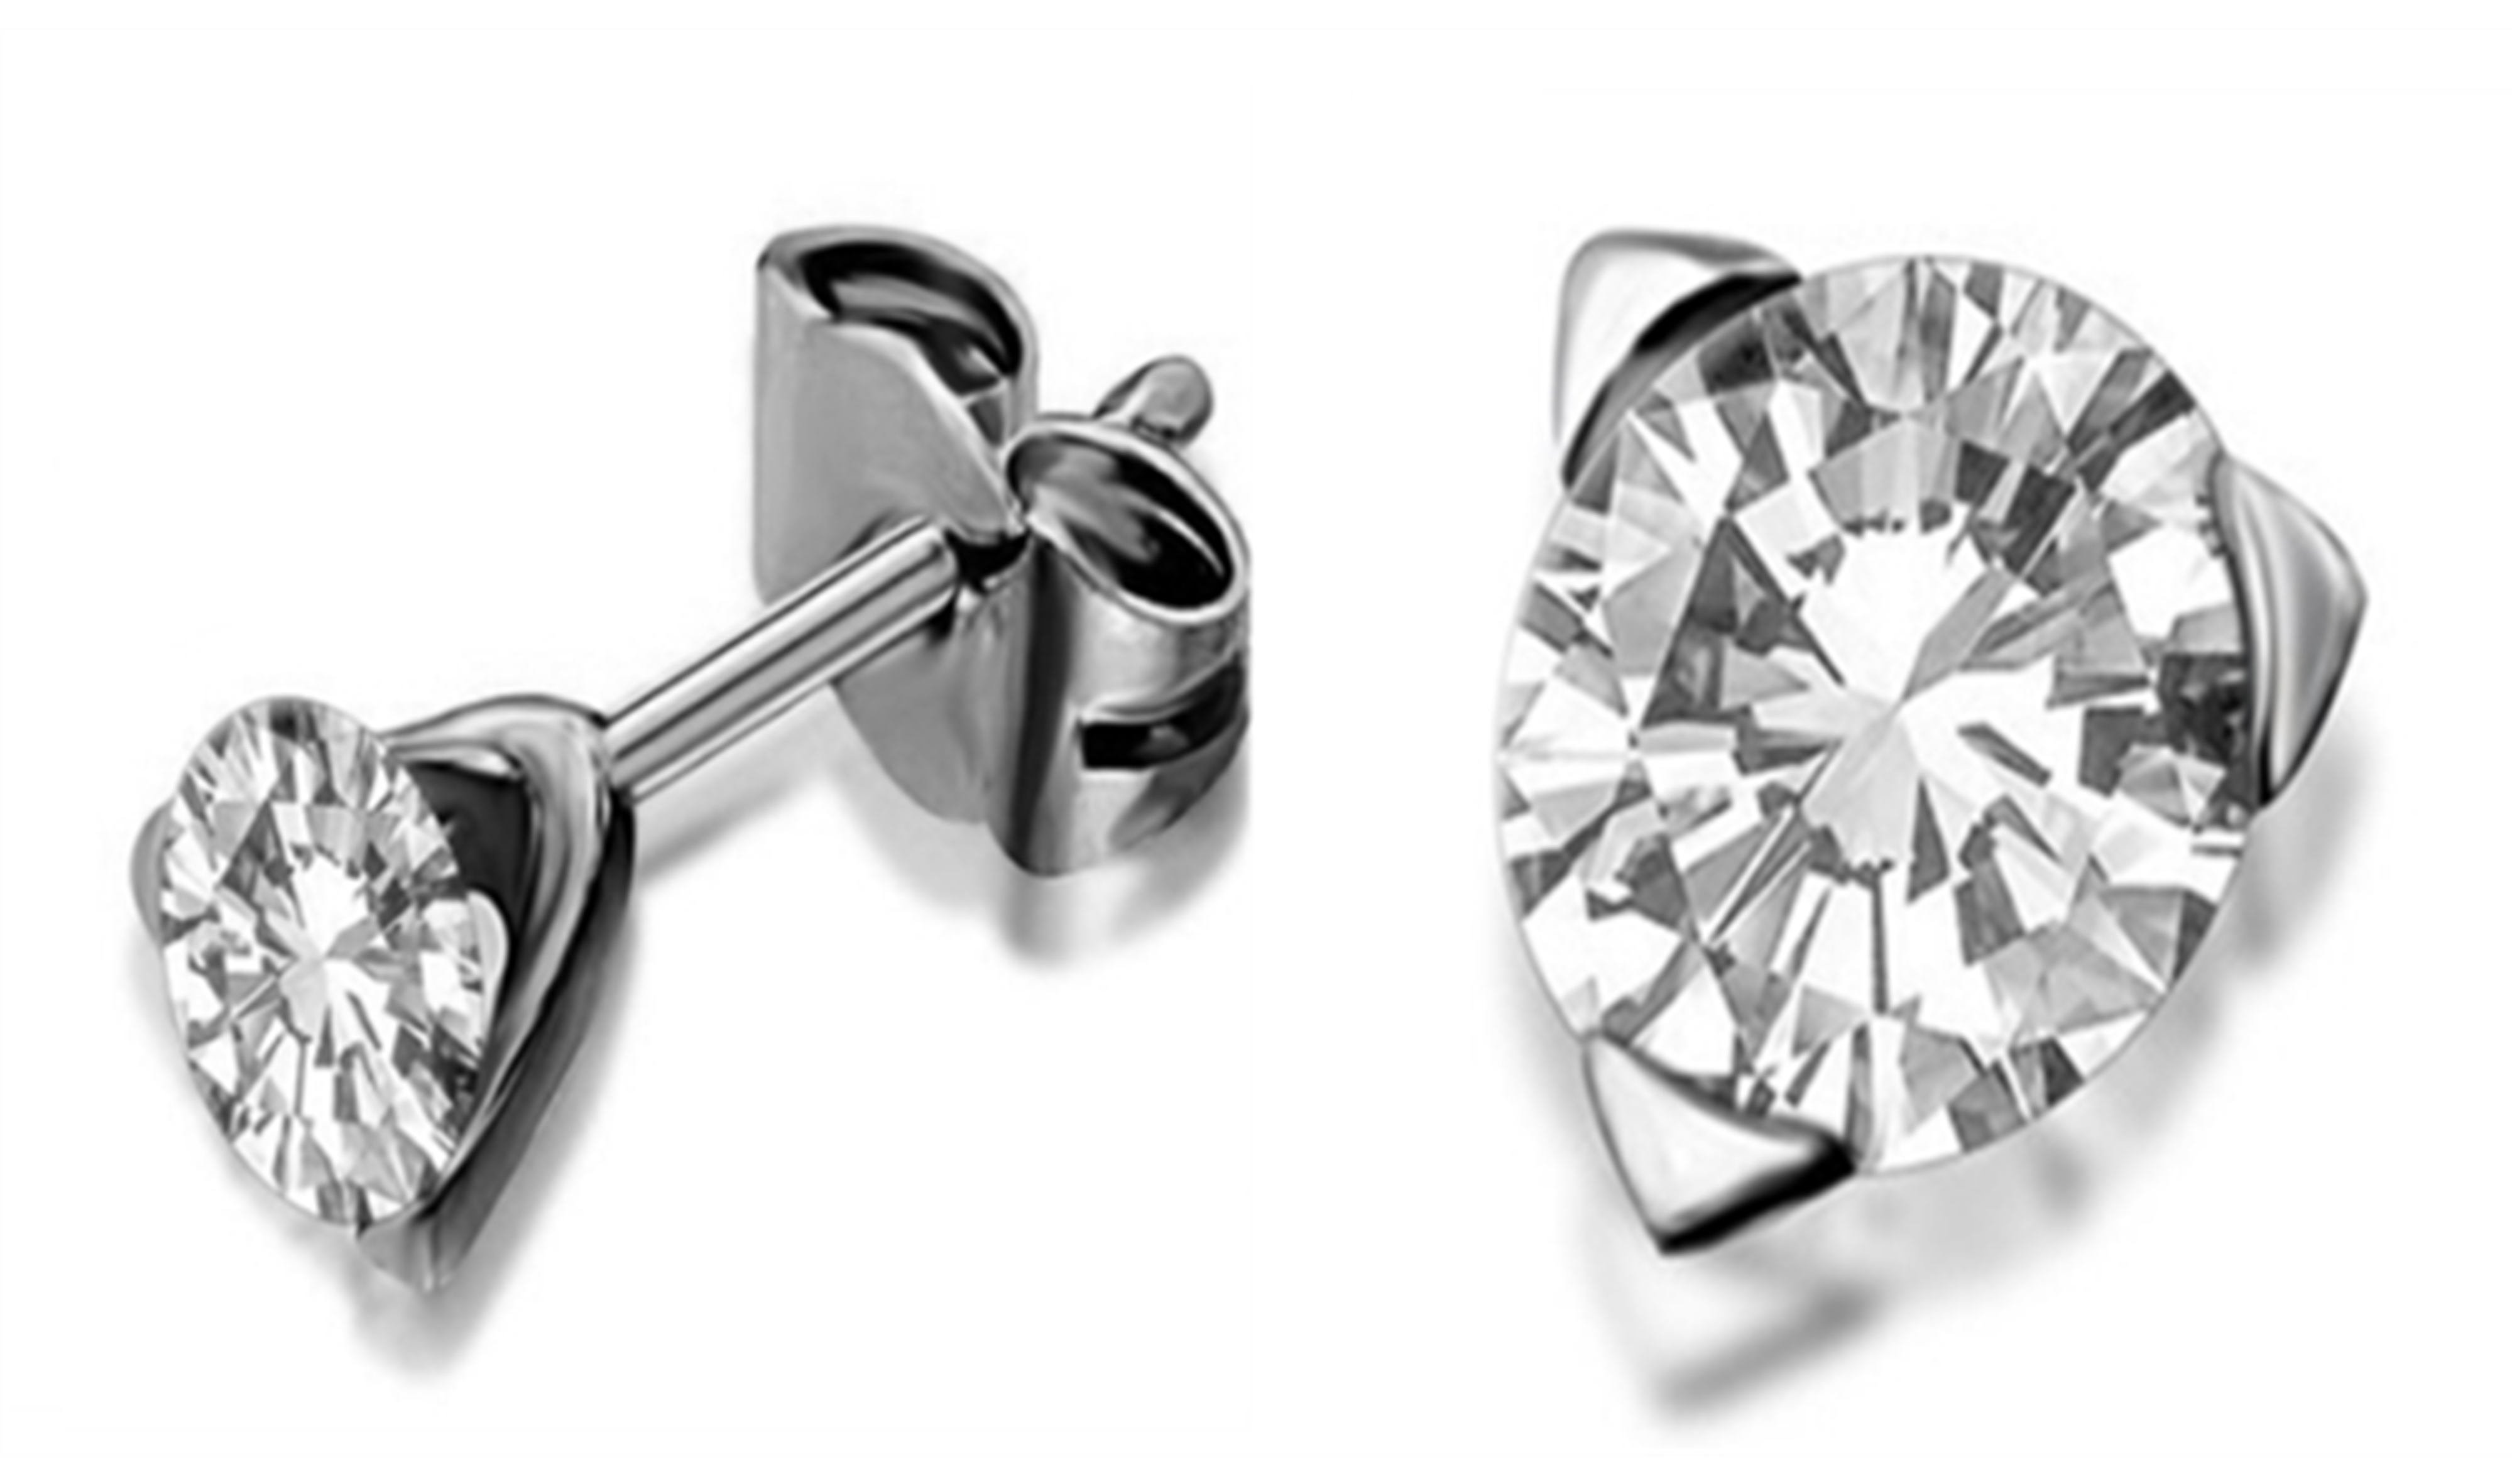 Best Mens Diamond Studs To Wear For Any Occasion